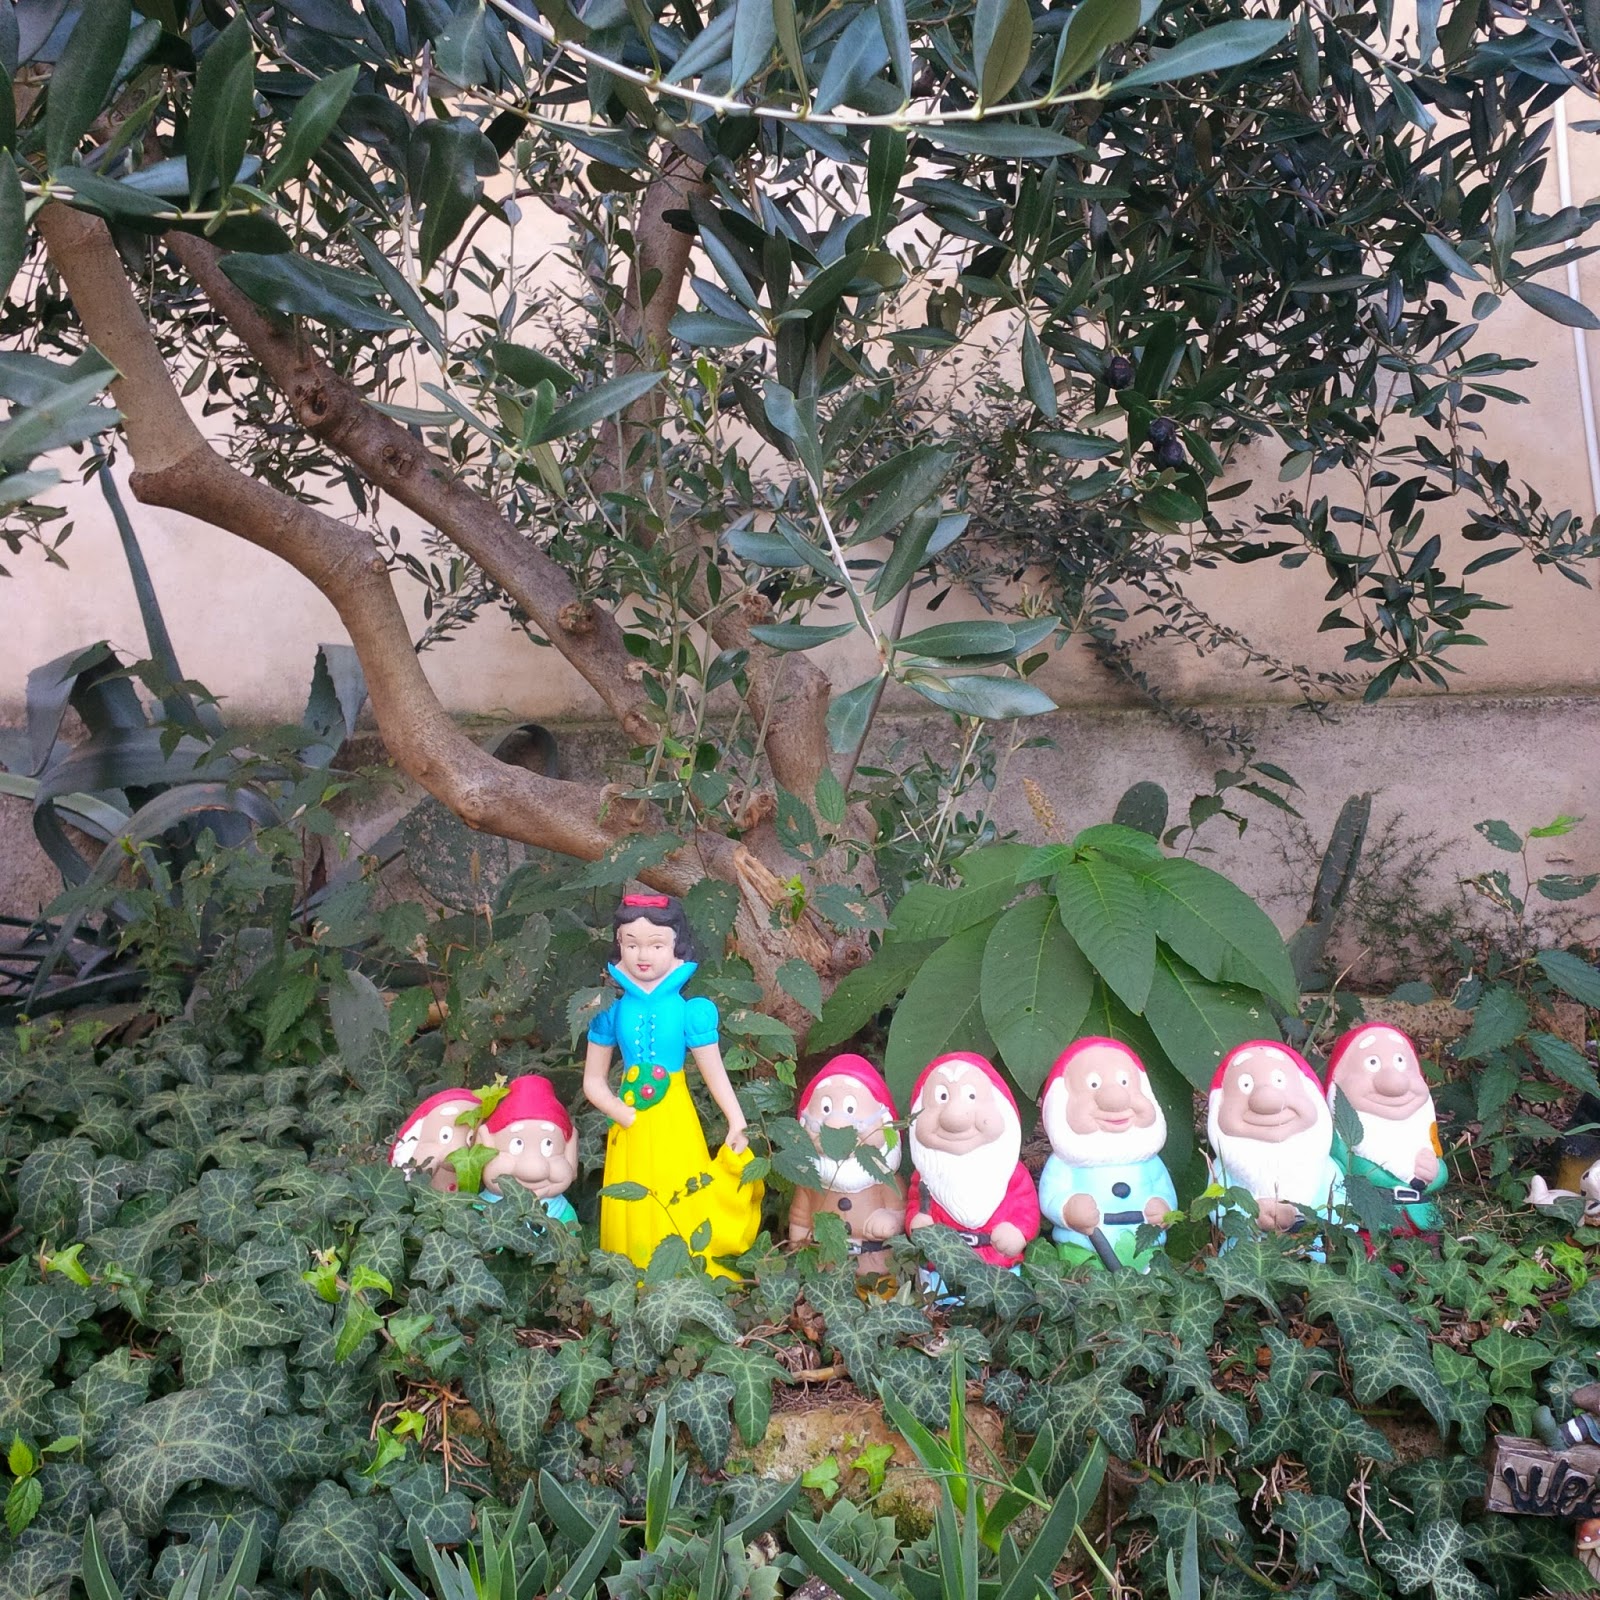 Disney figurines under an olive tree in the garden of a cafe in Arqua Petrarca